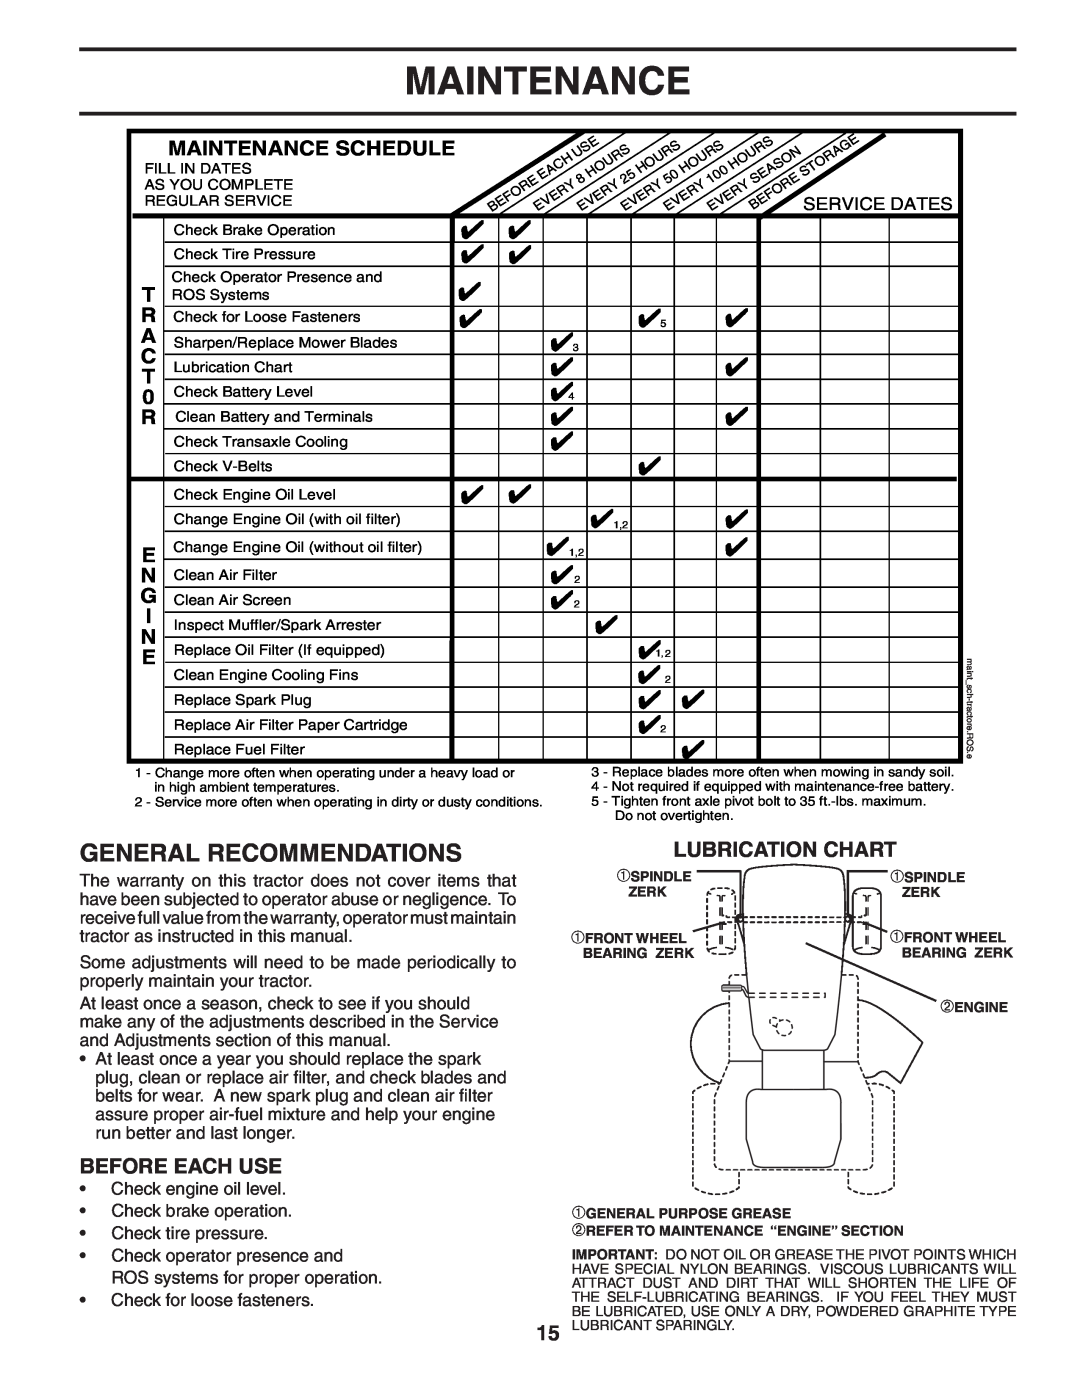 Poulan 194992 manual General Recommendations, Lubrication Chart, Before Each Use, Maintenance Schedule 